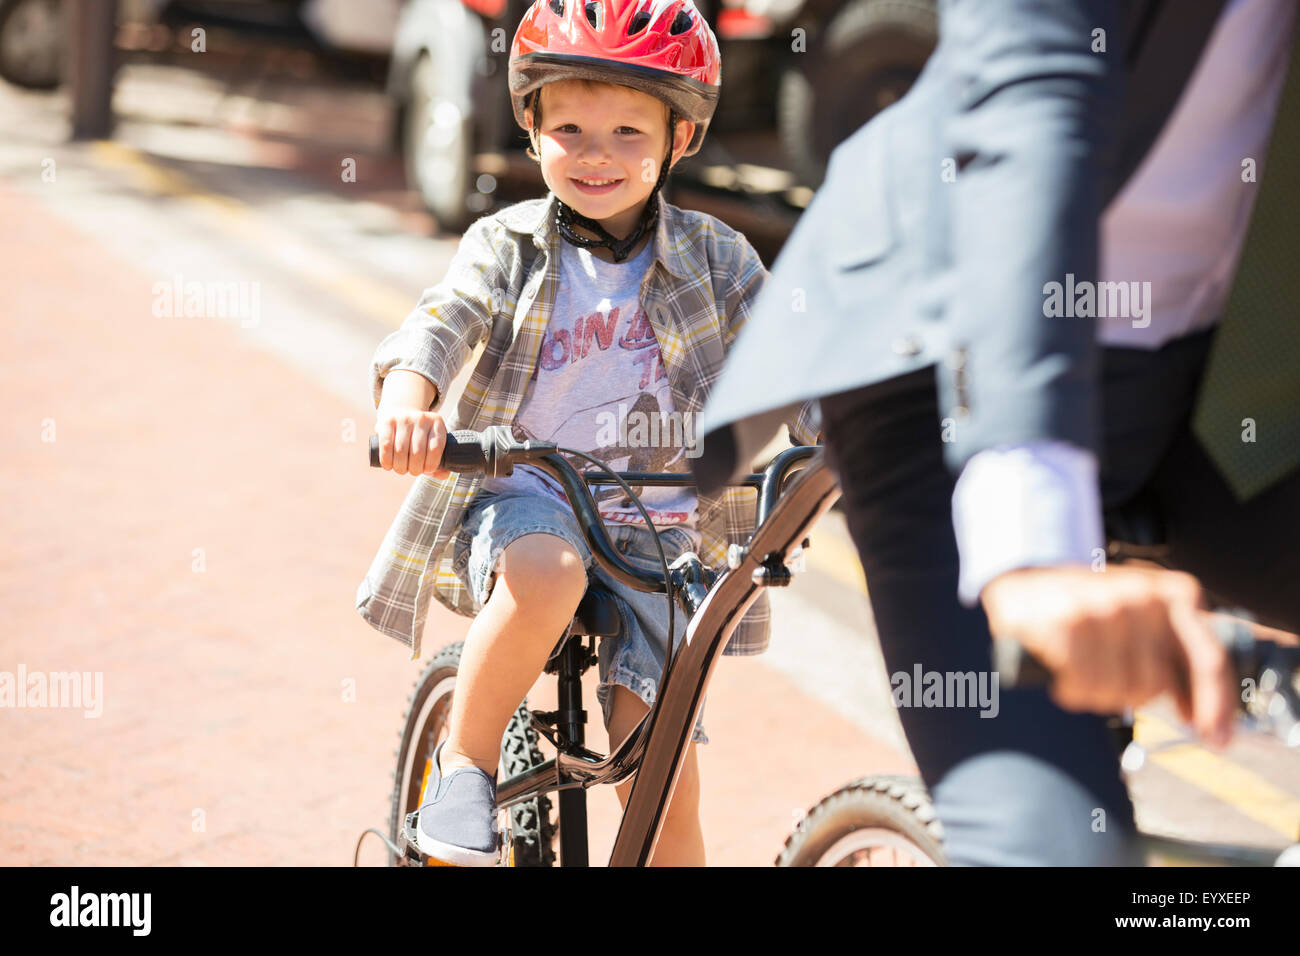 Portrait of smiling boy riding bicycle on sunny road Banque D'Images